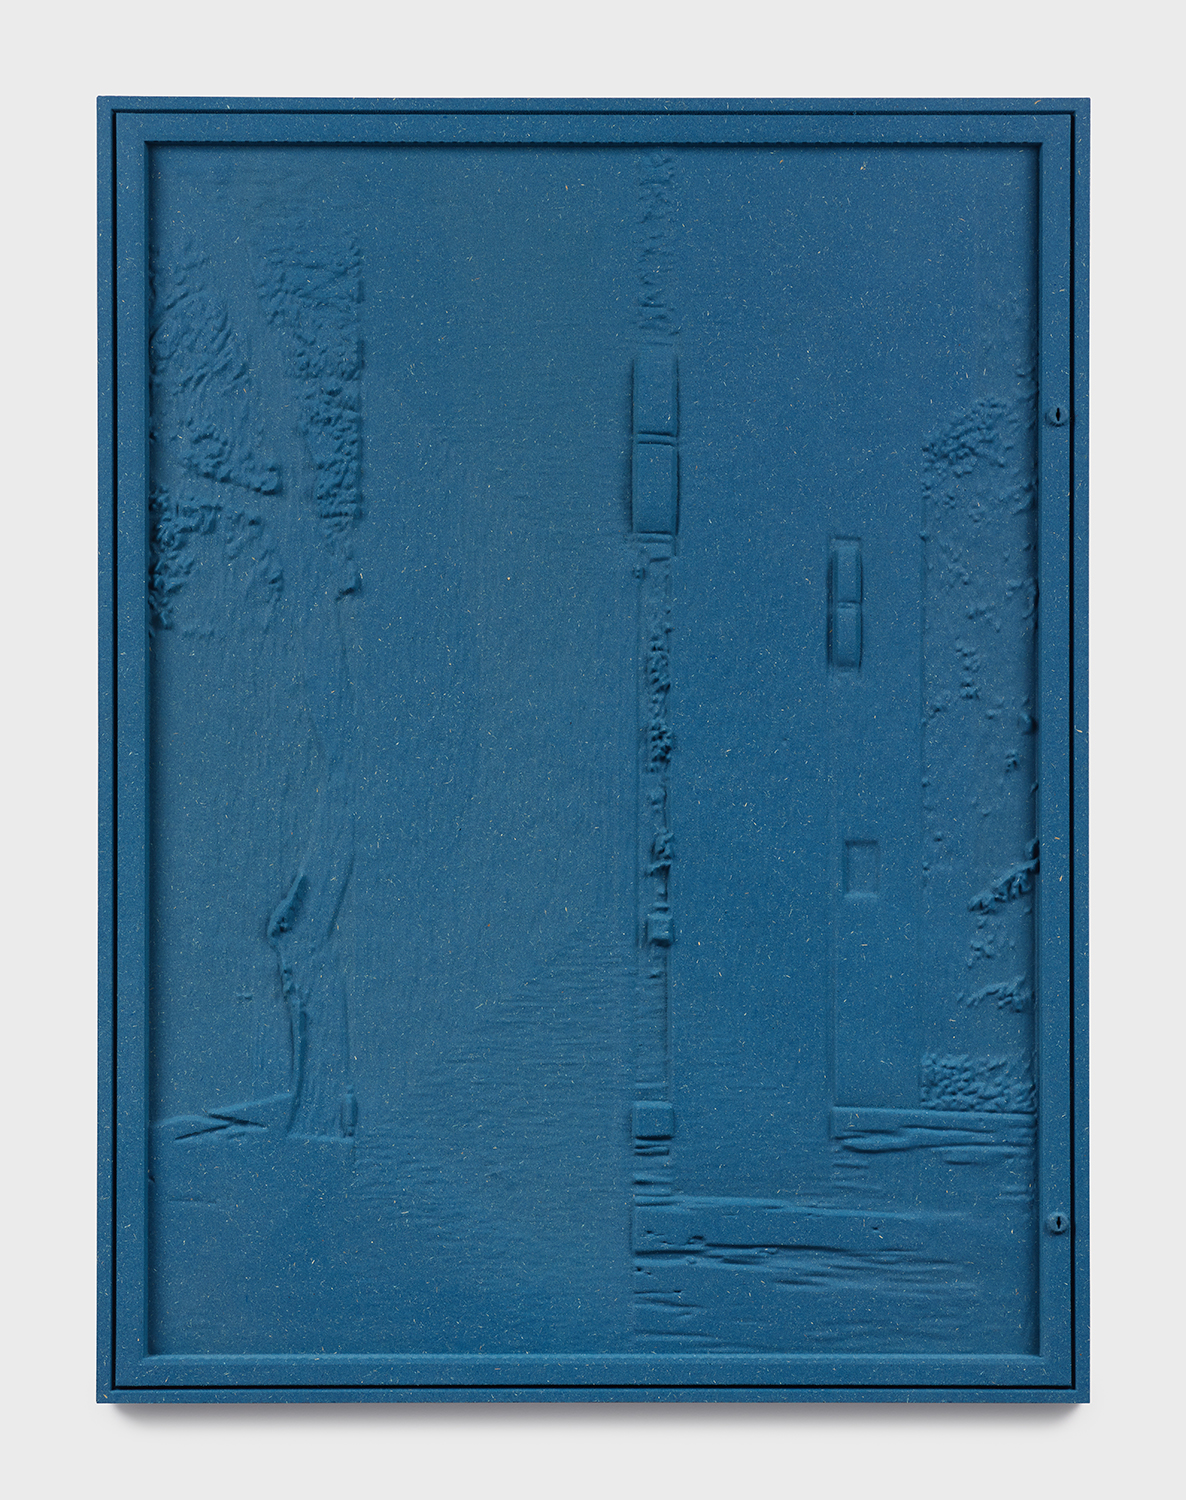 Jennifer Bolande, Bulletin Board (with tree and columns), 2018, Pigmented high density composite, 34.25h x 26w x 1.50d in